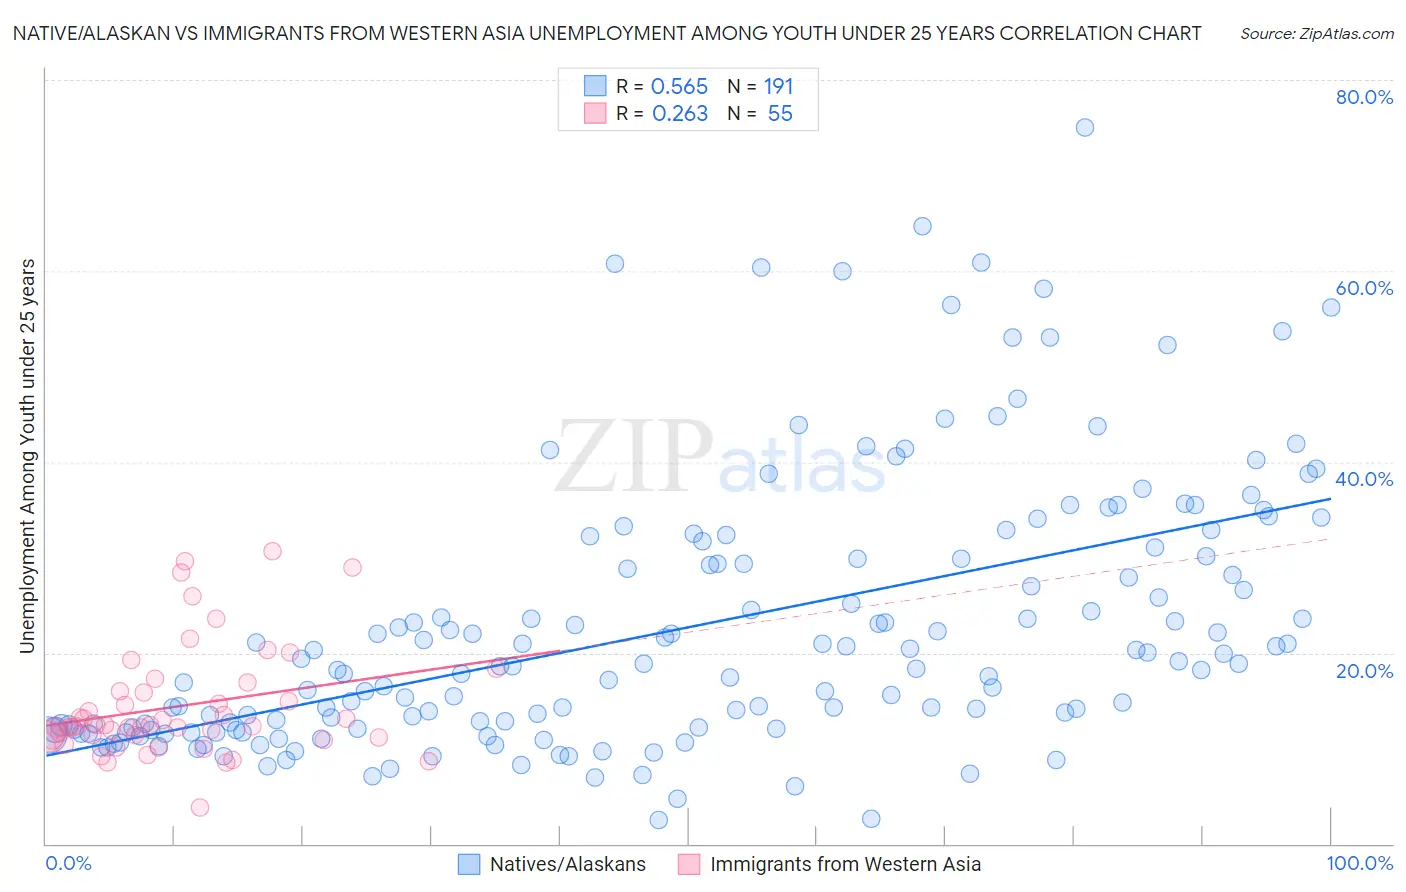 Native/Alaskan vs Immigrants from Western Asia Unemployment Among Youth under 25 years